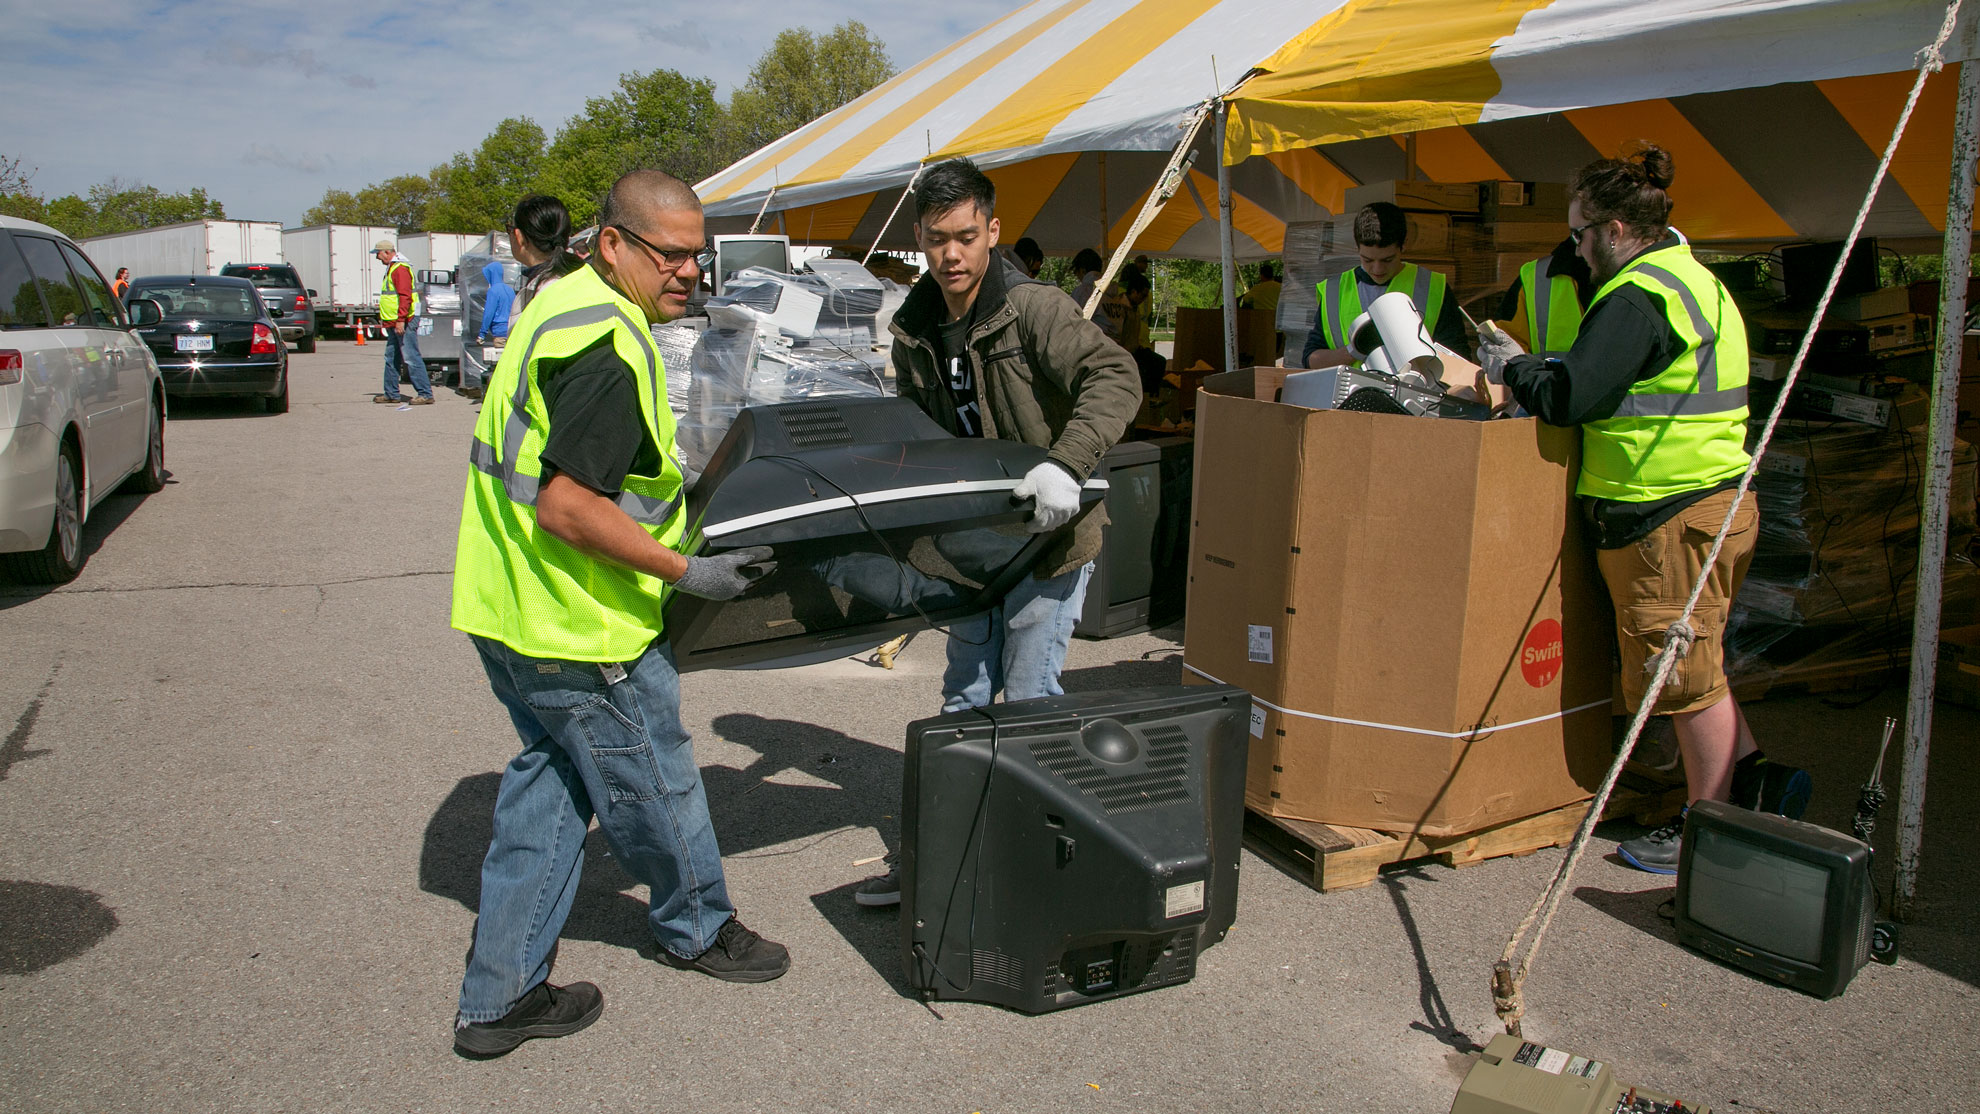 Two volunteers move television from vehicle to stack of electronics for recycling under large outdoor event tent